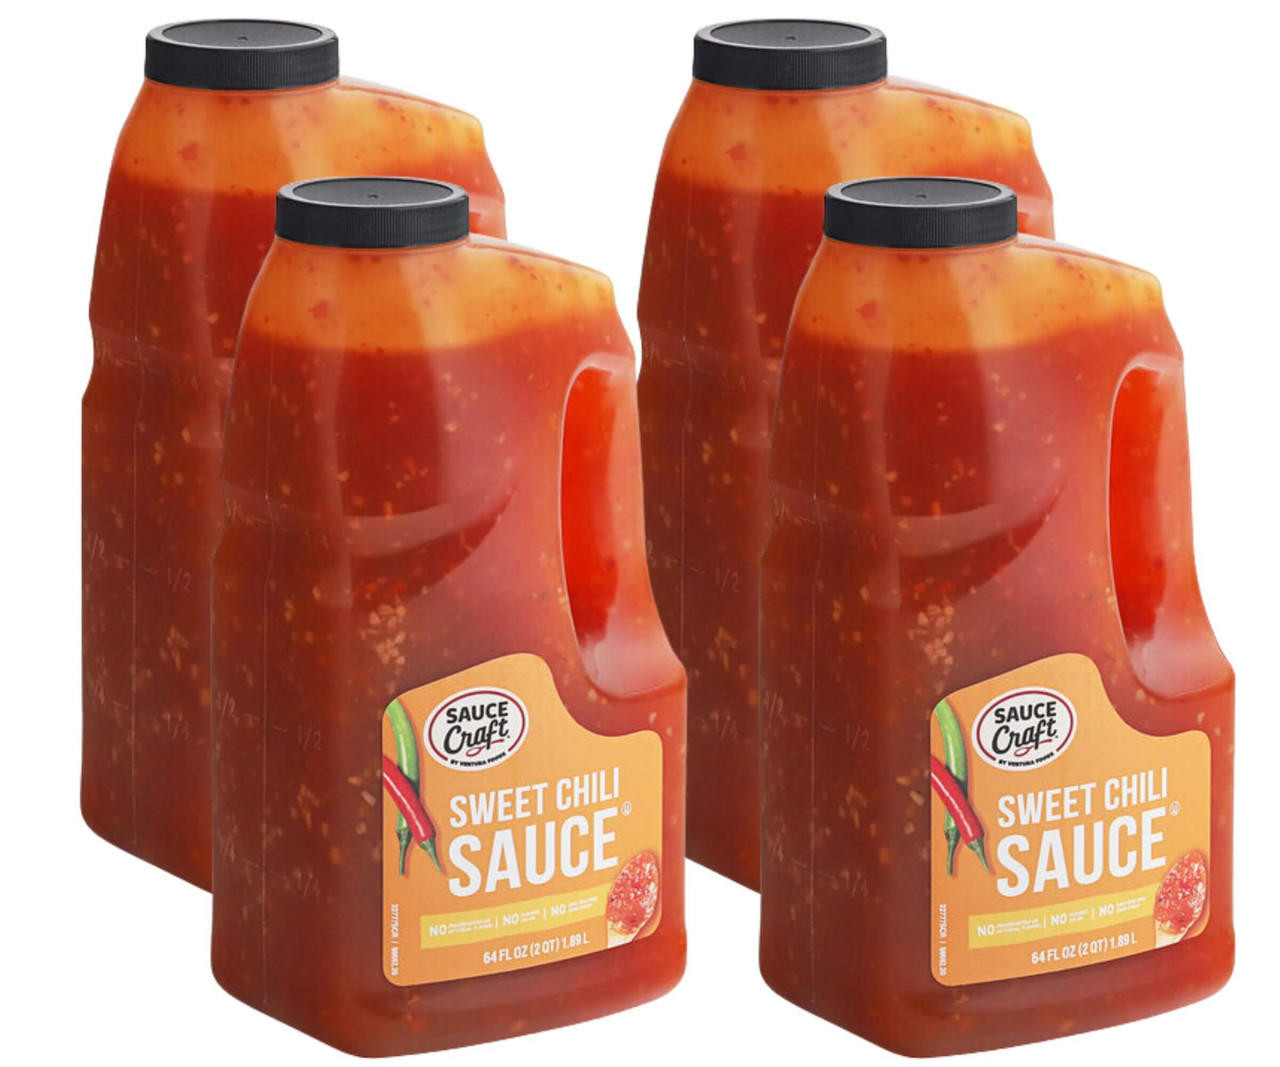  Sauce Craft Sweet Chili Sauce 0.5 Gallon - 4/Case | Delightful Sweet and Spicy Condiment 